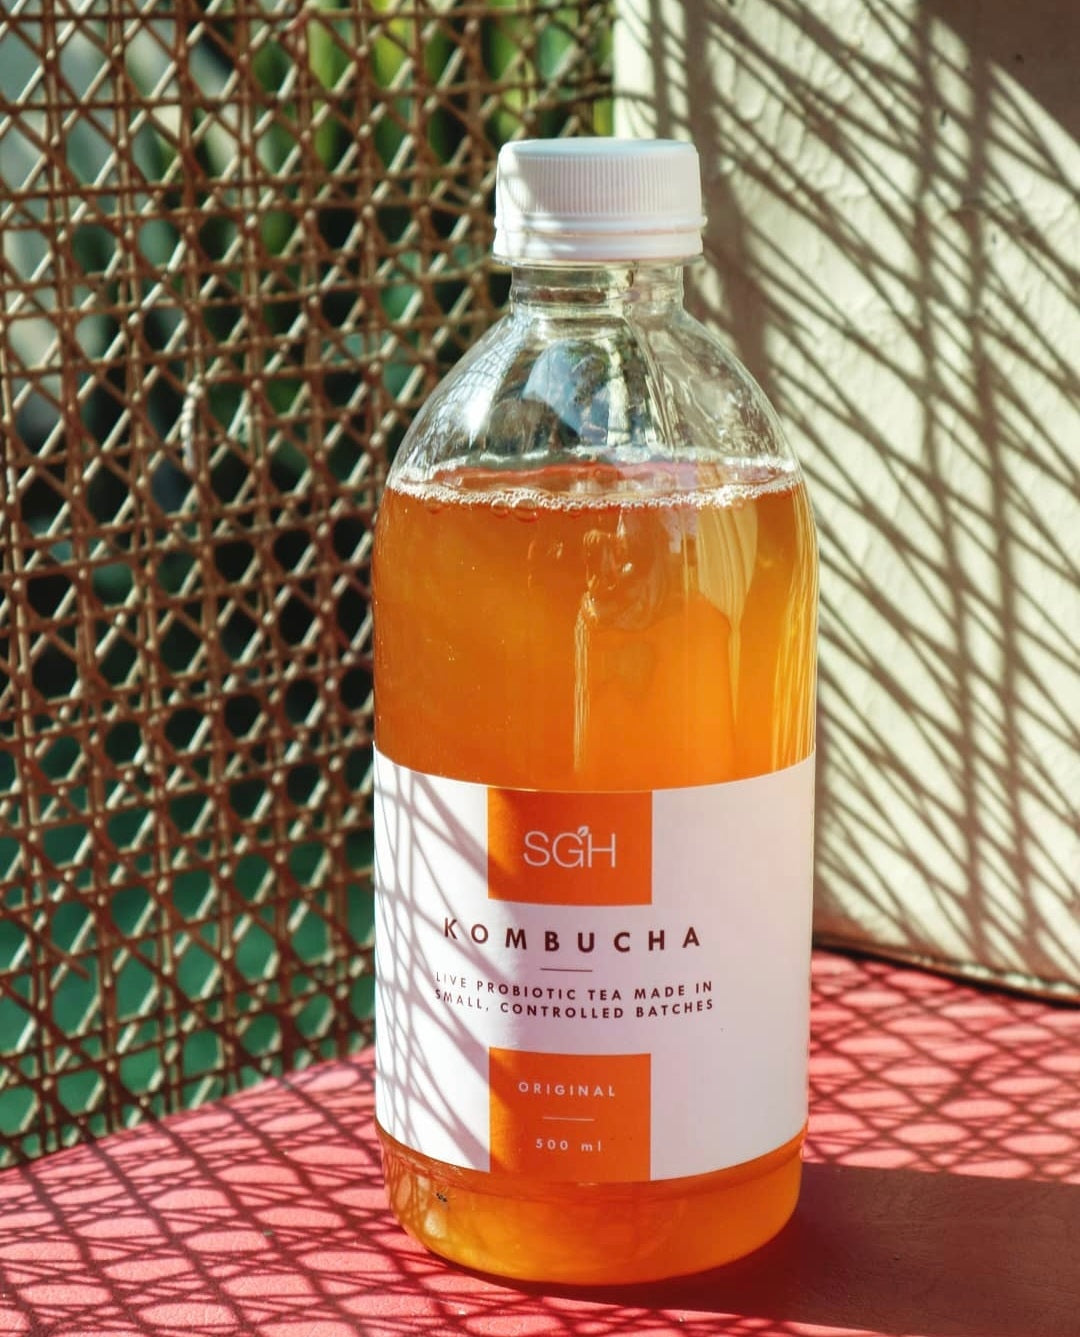 Buy Kombucha from SGH at the Best Prices online in Pakistan, Quick Delivery and Easy Returns only at The Nature's Store, Best organic and natural Probiotics and Kombucha in Pakistan, 